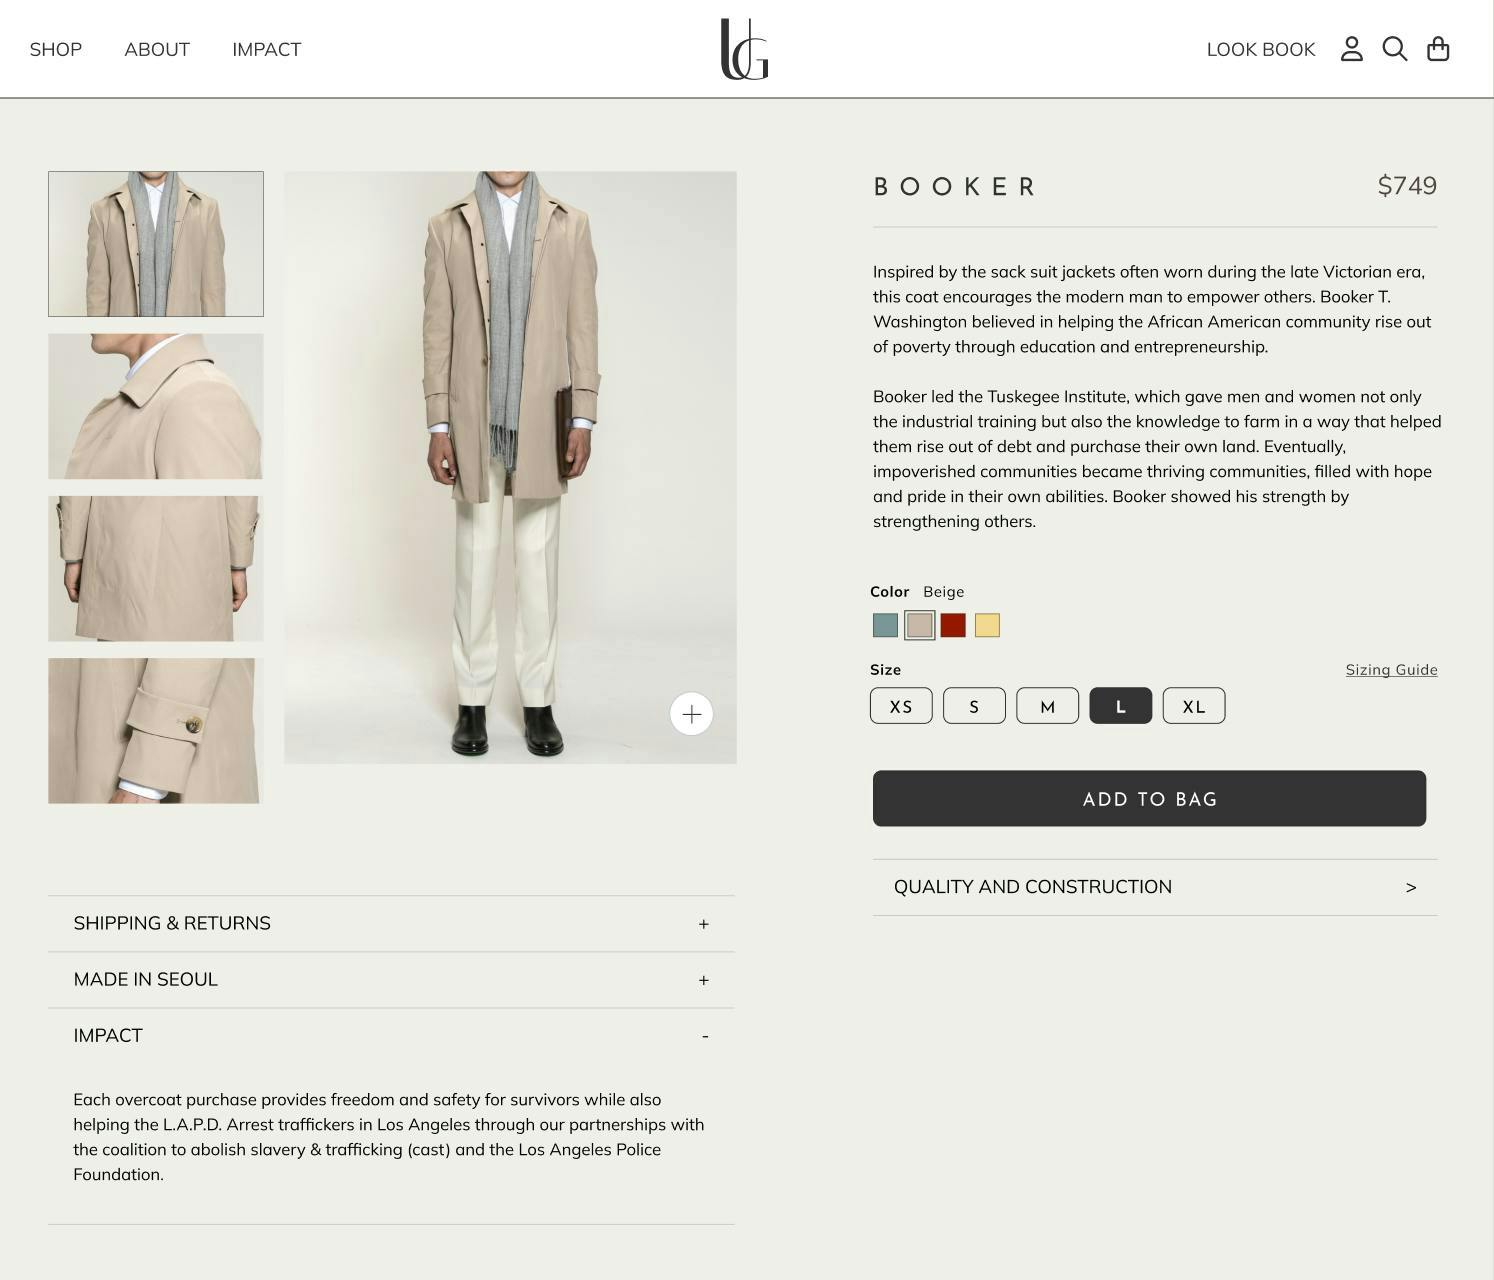  A man wearing a suit posing against a white backdrop in the shop section of Urbane and Gallant's ecommerce website. This is the details section where customers can adjust the color and size of the suit.